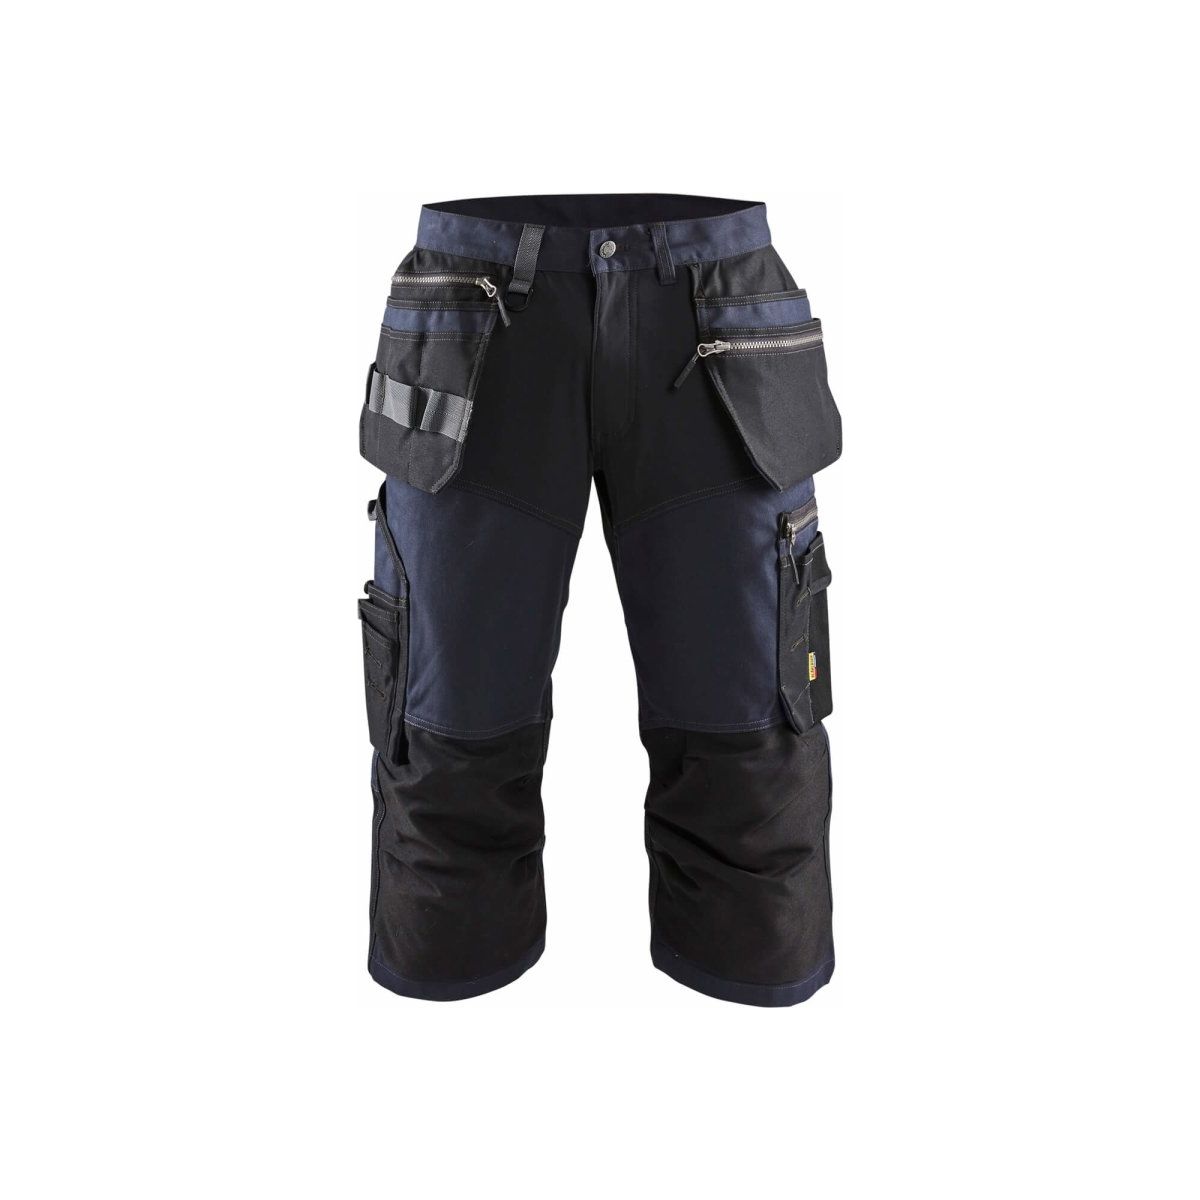 Blaklader 1597 Pirate Trousers With Stretch (15971343) - Mens - workweargurus.com